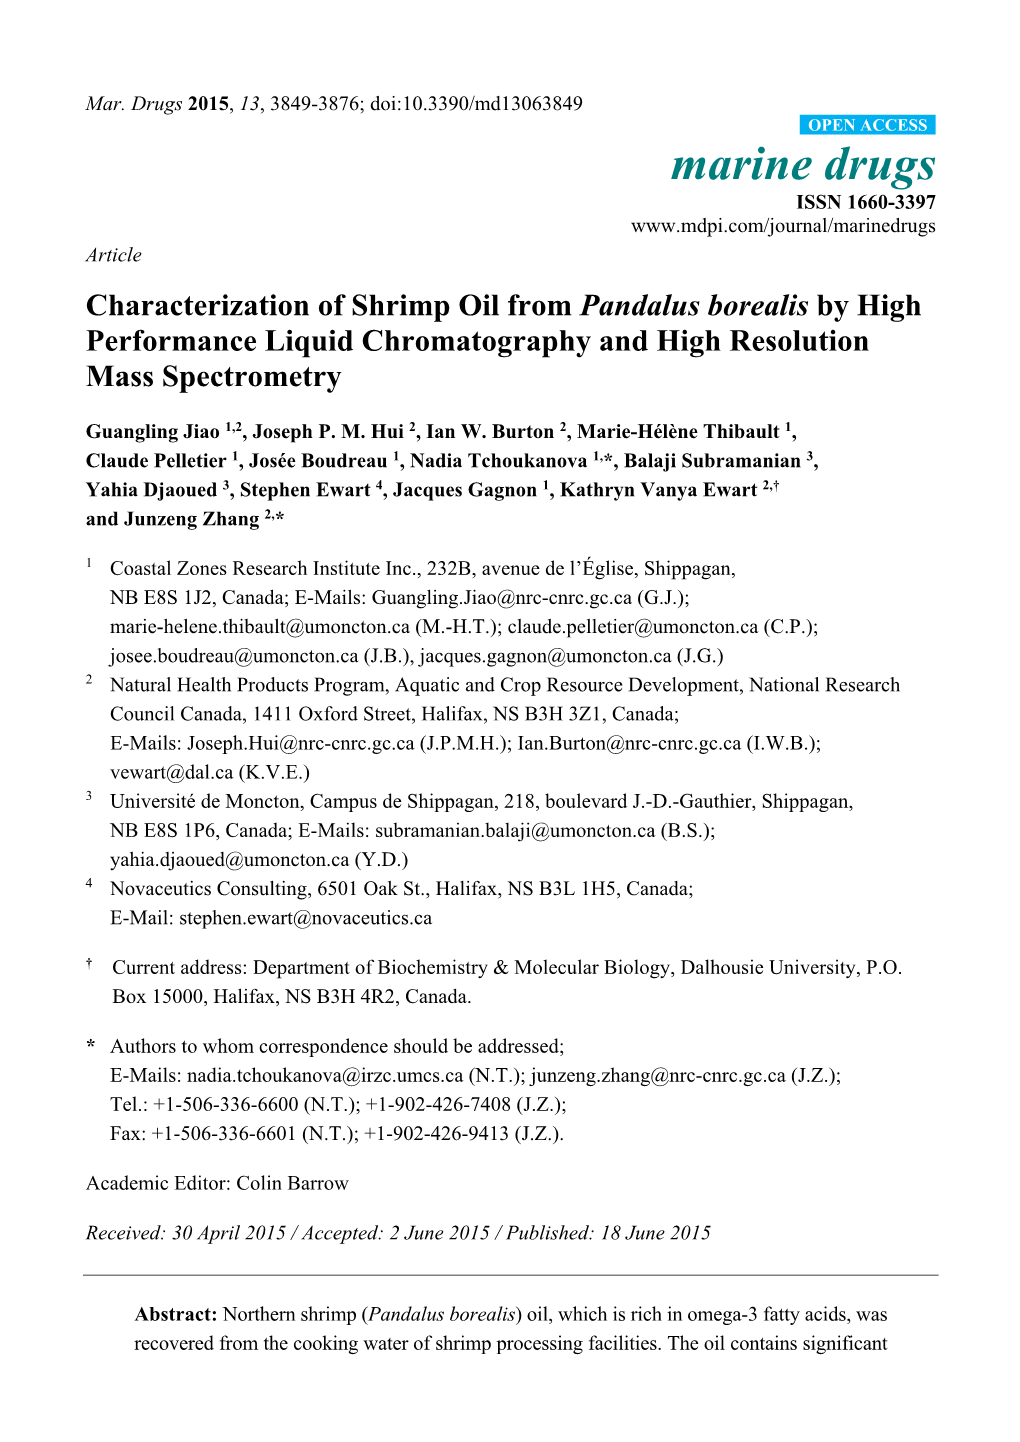 Characterization of Shrimp Oil from Pandalus Borealis by High Performance Liquid Chromatography and High Resolution Mass Spectrometry